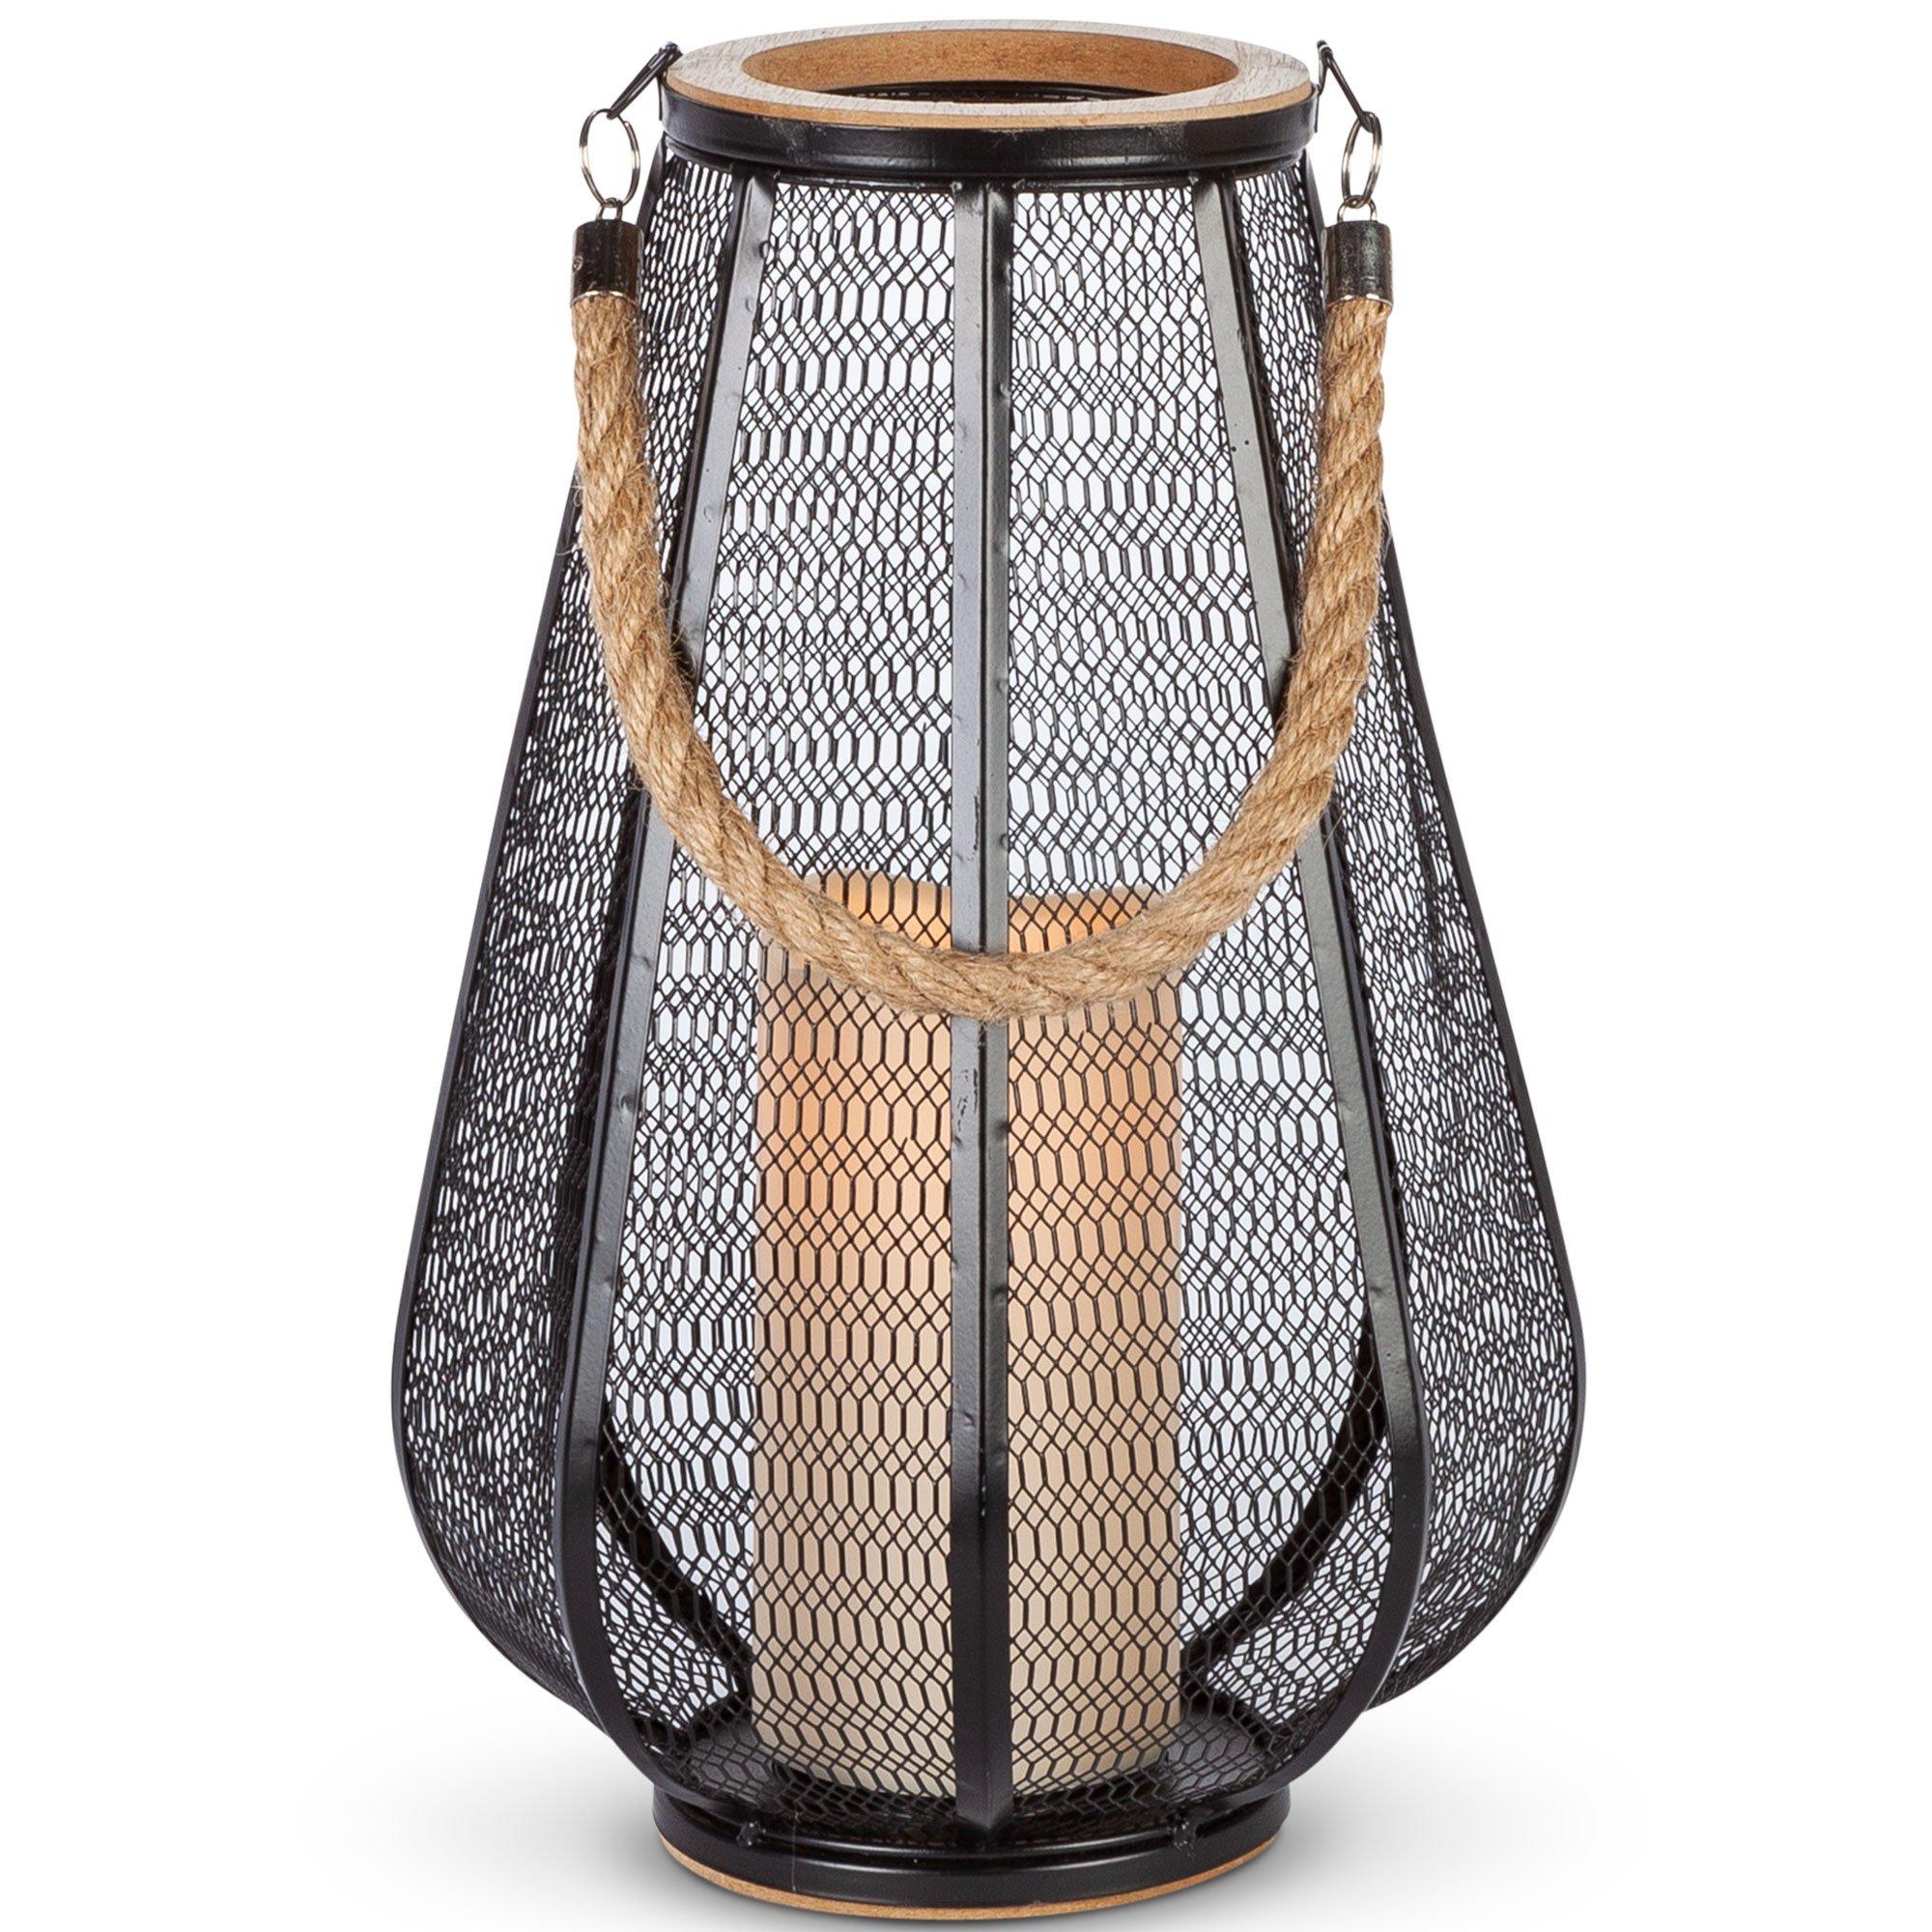 Black Metal Mesh LED Candle Lantern with Wood Trim, 7.5in x 12.2in